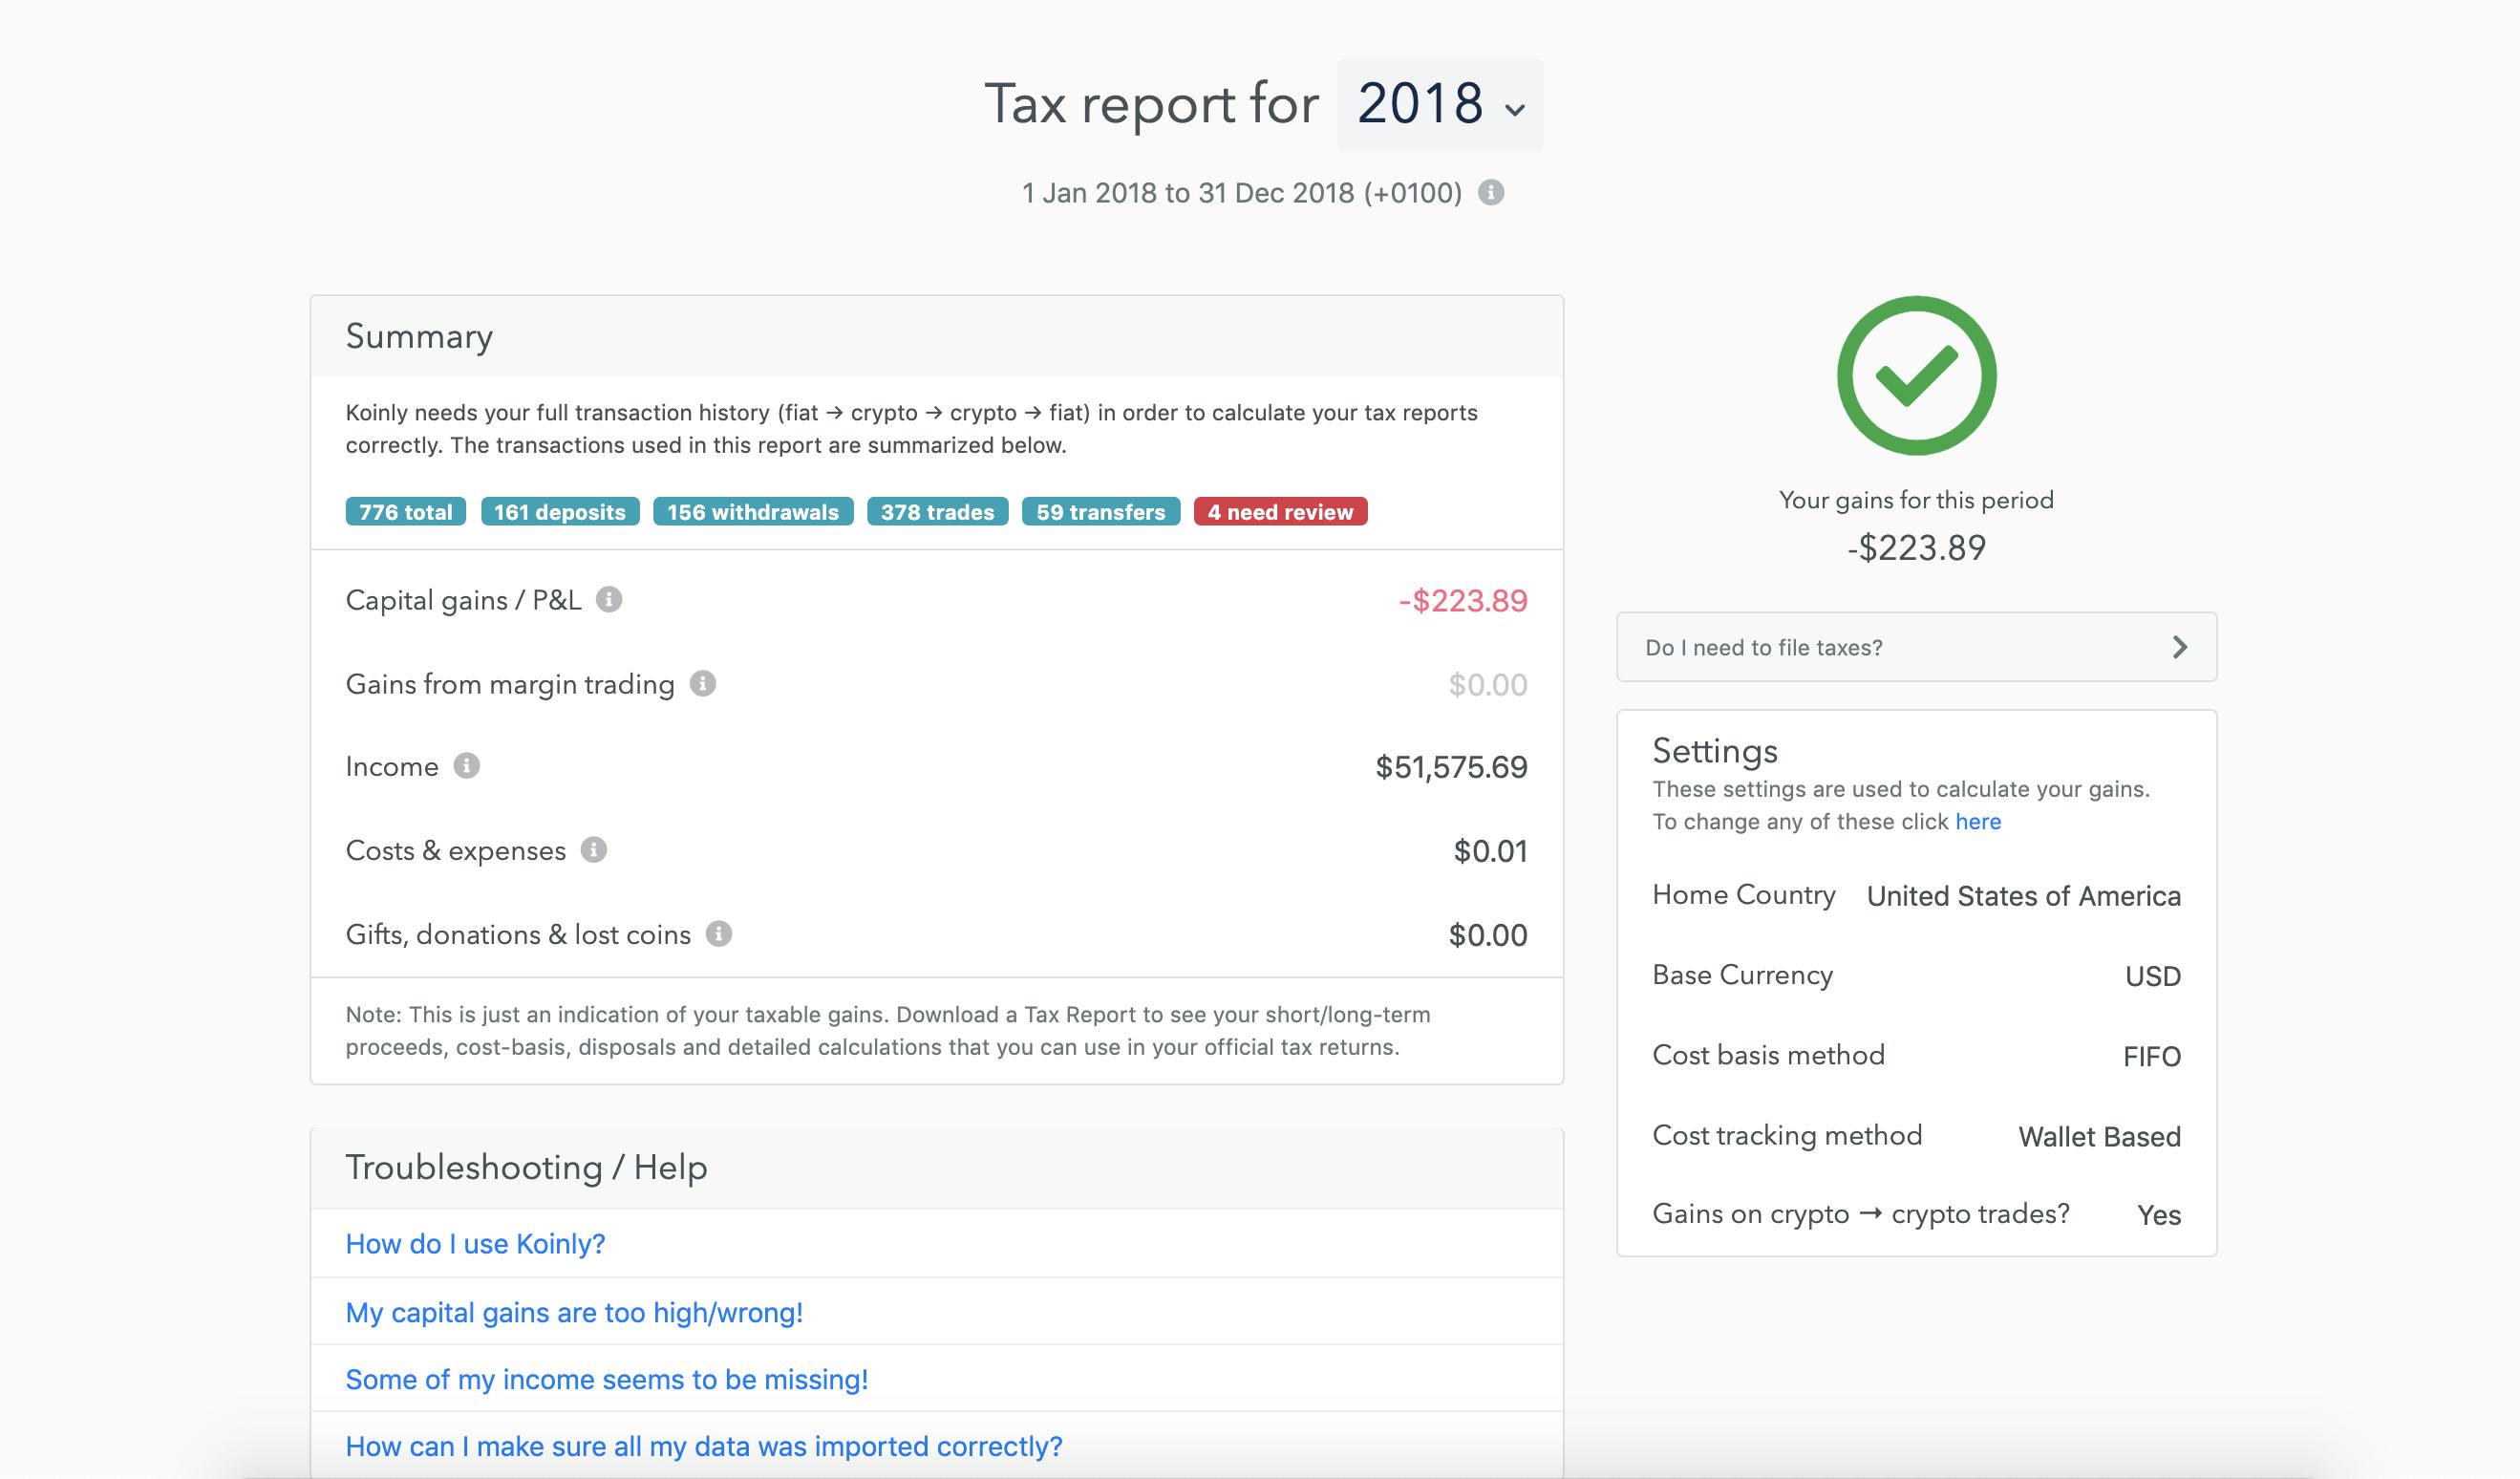 free tax software for crypto